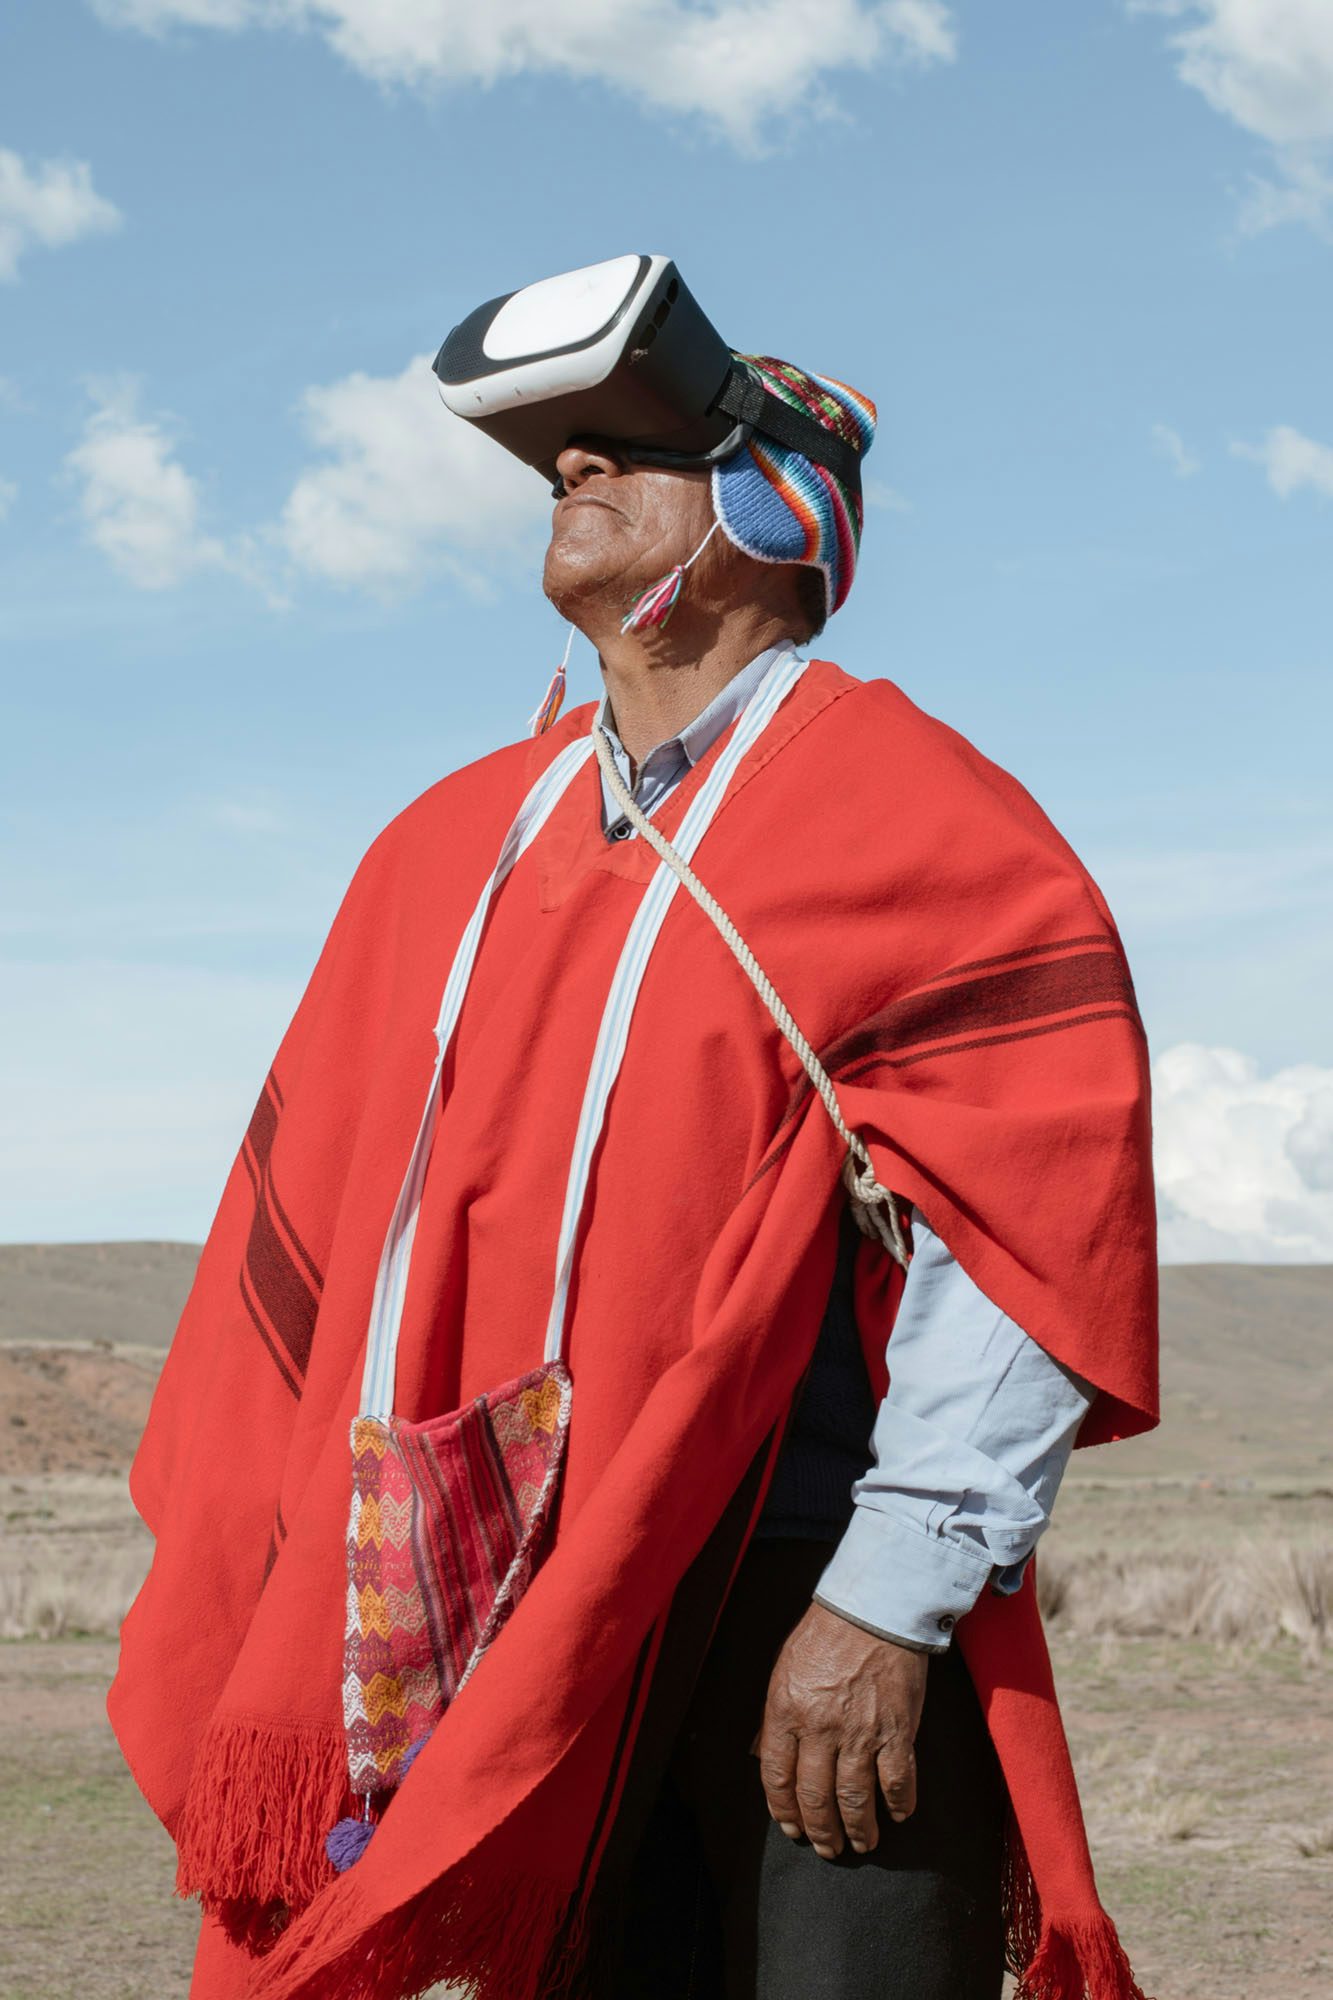 Image by River Claure showing a person wearing a VR headset facing upwards